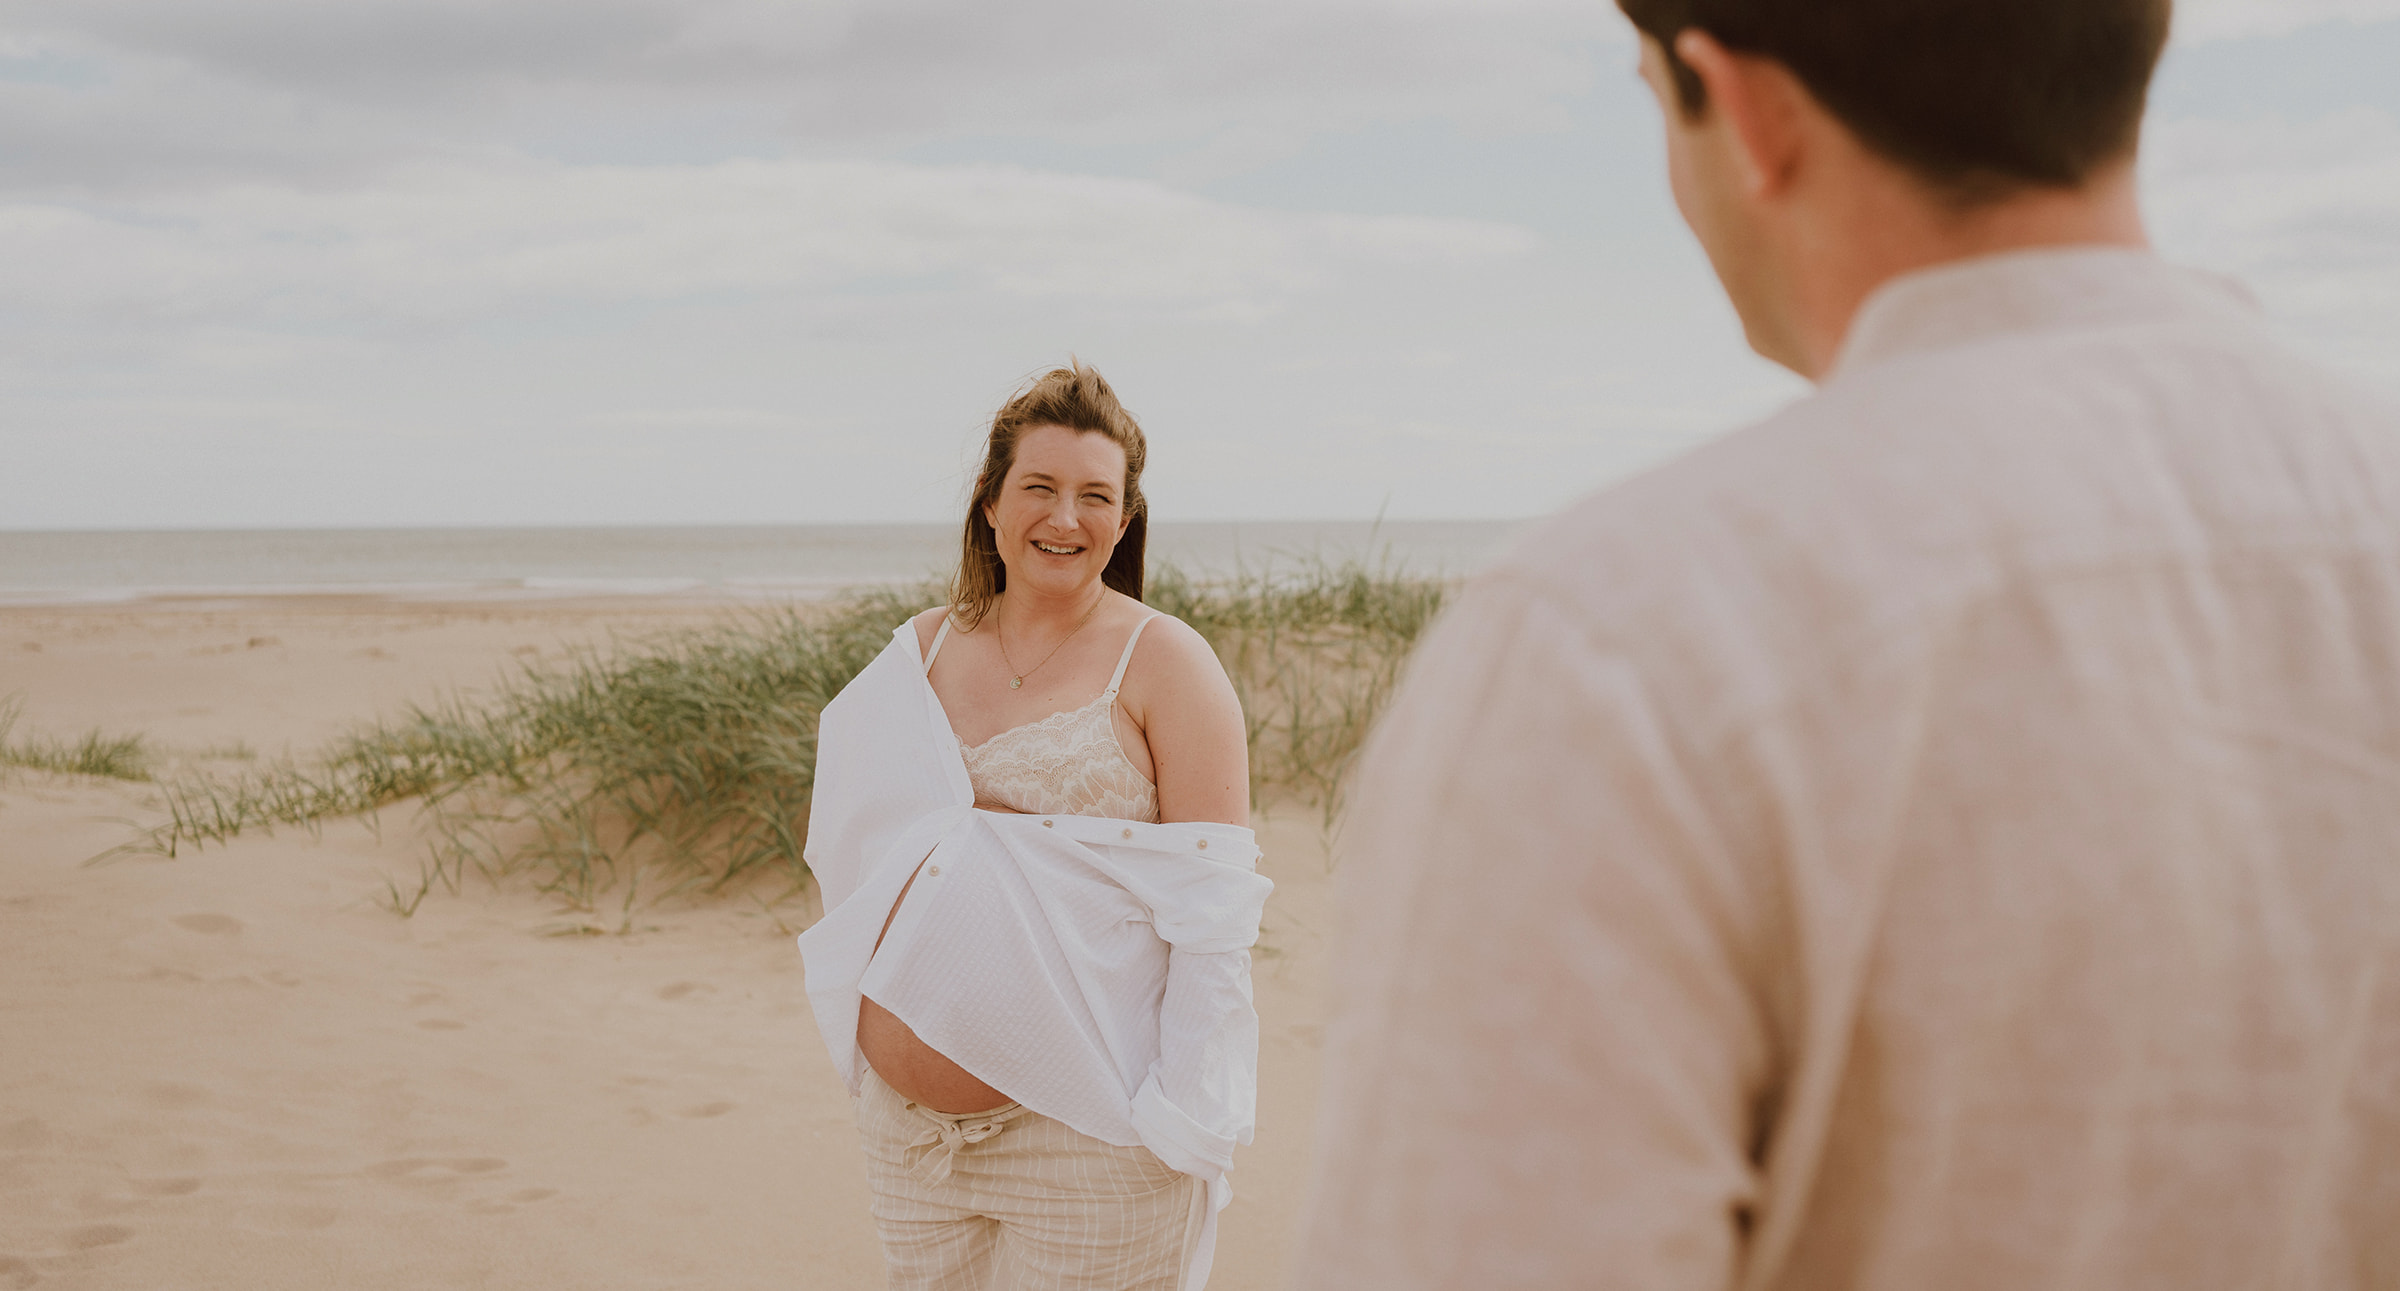 Pregnant lady smiles at her husband during maternity photoshoot